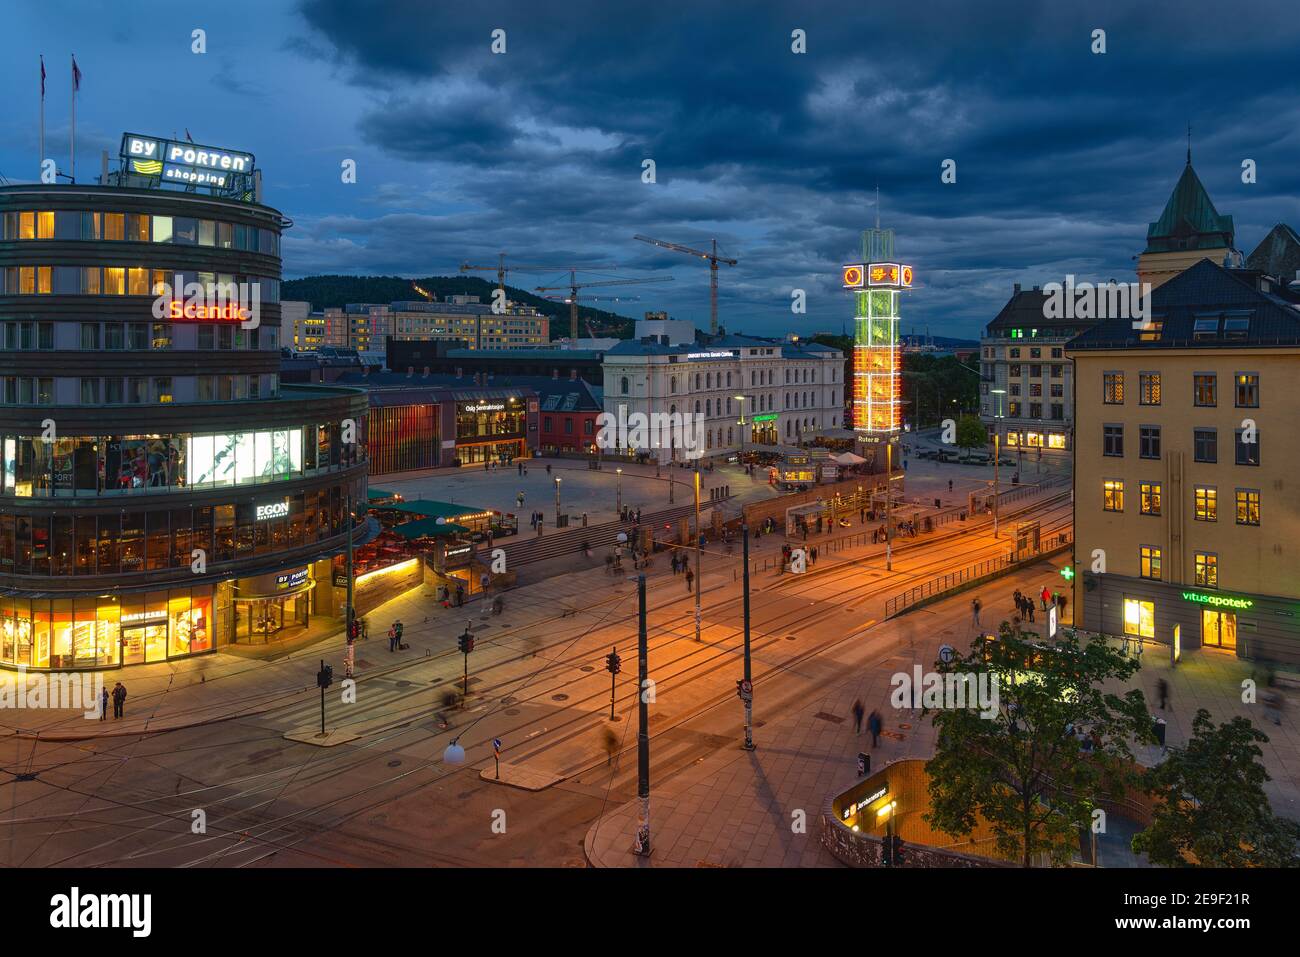 Oslo, Norway - August 10, 2016: View of Central Station and Jernbanetorget square at dusk. This station is the main railway station in Oslo Stock Photo